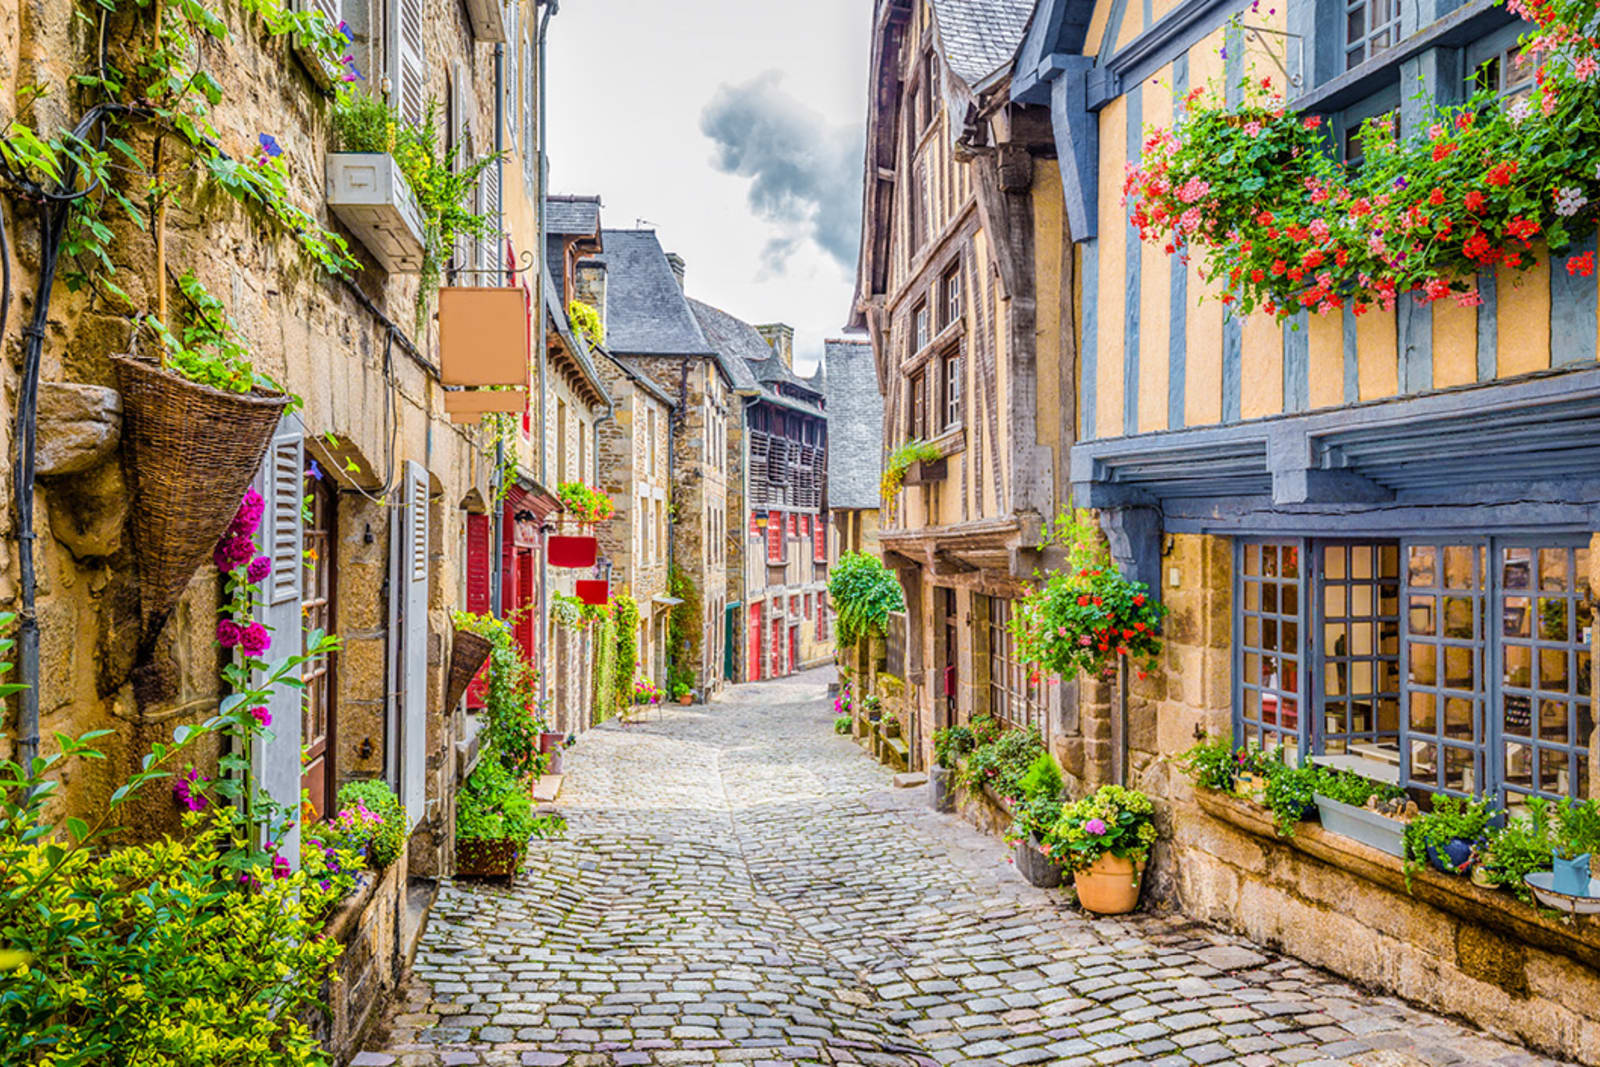 The quaint town of Dinan is one of the best places to stay in France (besides Paris!)